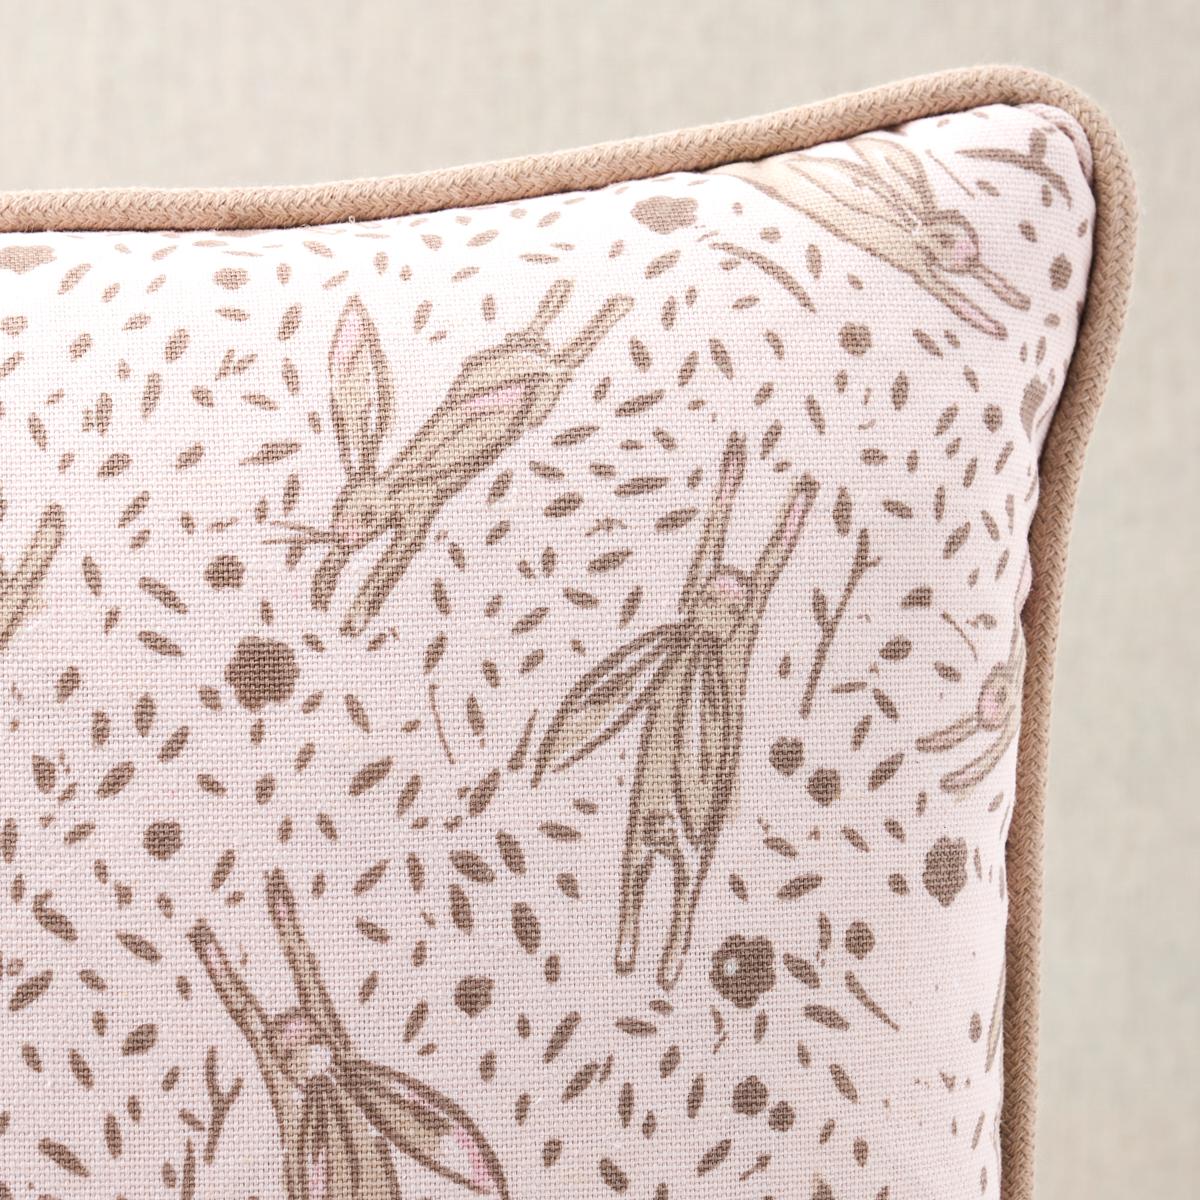 This pillow features Rabbit High-Performance Print by Marie-Chantal of Greece for Schumacher. Marie-Chantal’s Rabbit High-Performance Print in blush is a cheery small-scale critter pattern on a lovely cotton-linen ground. Pillow is finished with a